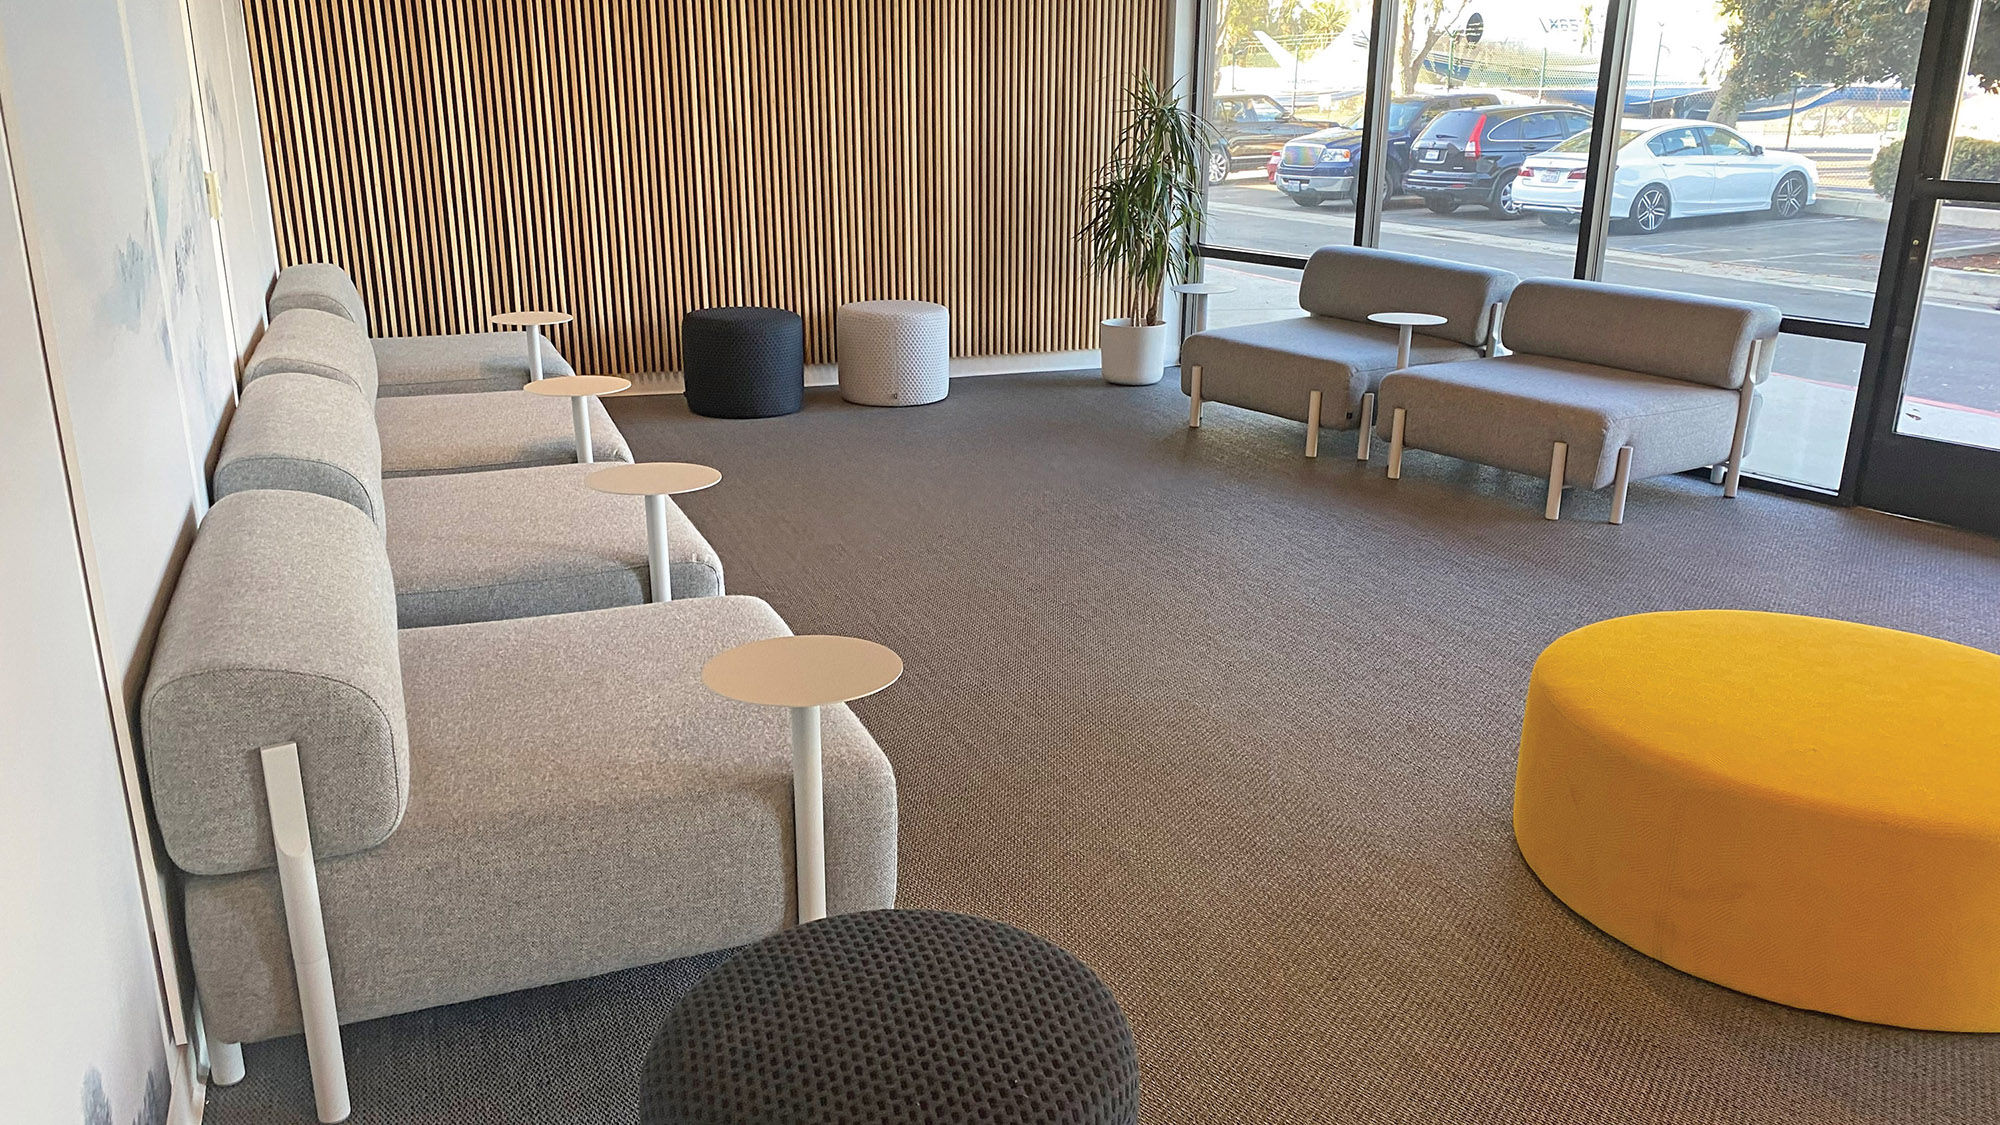 The Aero "terminal" at Van Nuys Airport is a lounge with modern decor, comfortable seating and complimentary snacks and beverages.